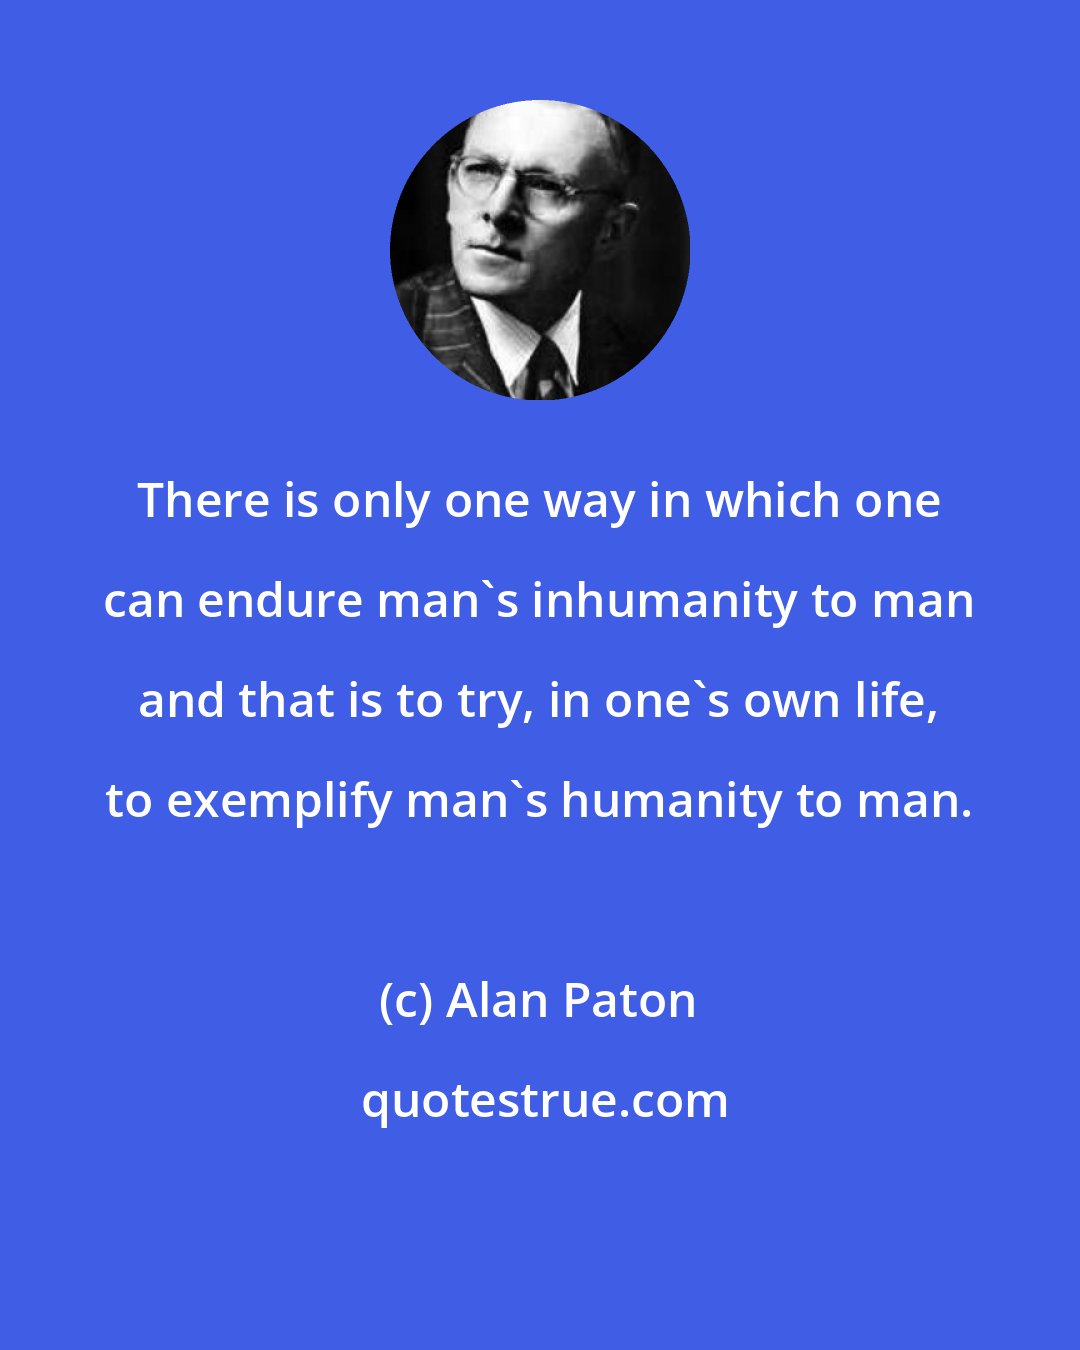 Alan Paton: There is only one way in which one can endure man's inhumanity to man and that is to try, in one's own life, to exemplify man's humanity to man.